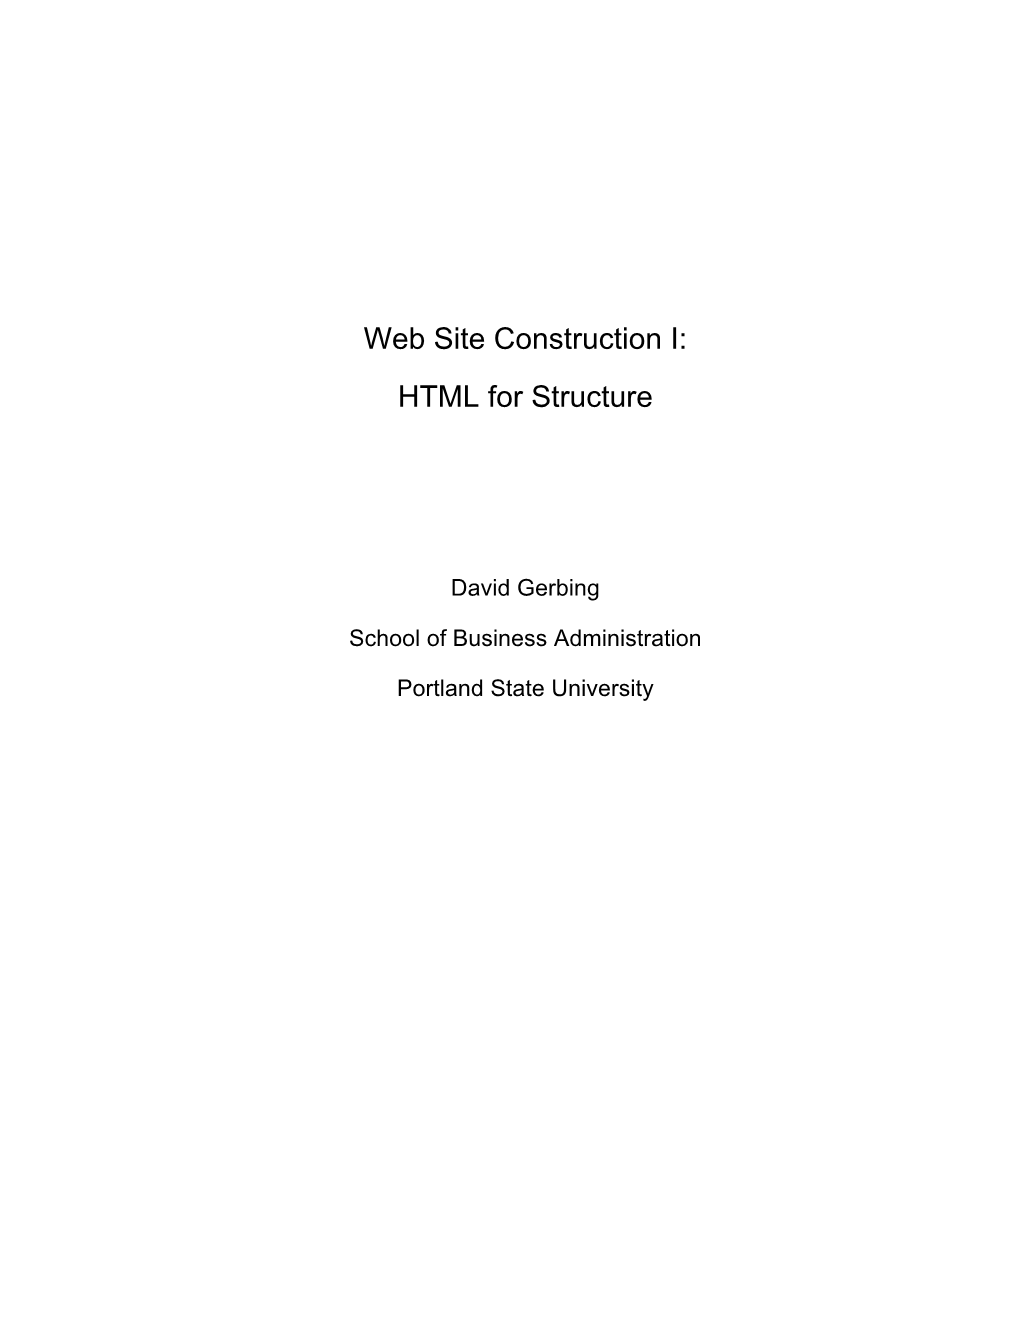 Web Site Construction I: HTML for Structure